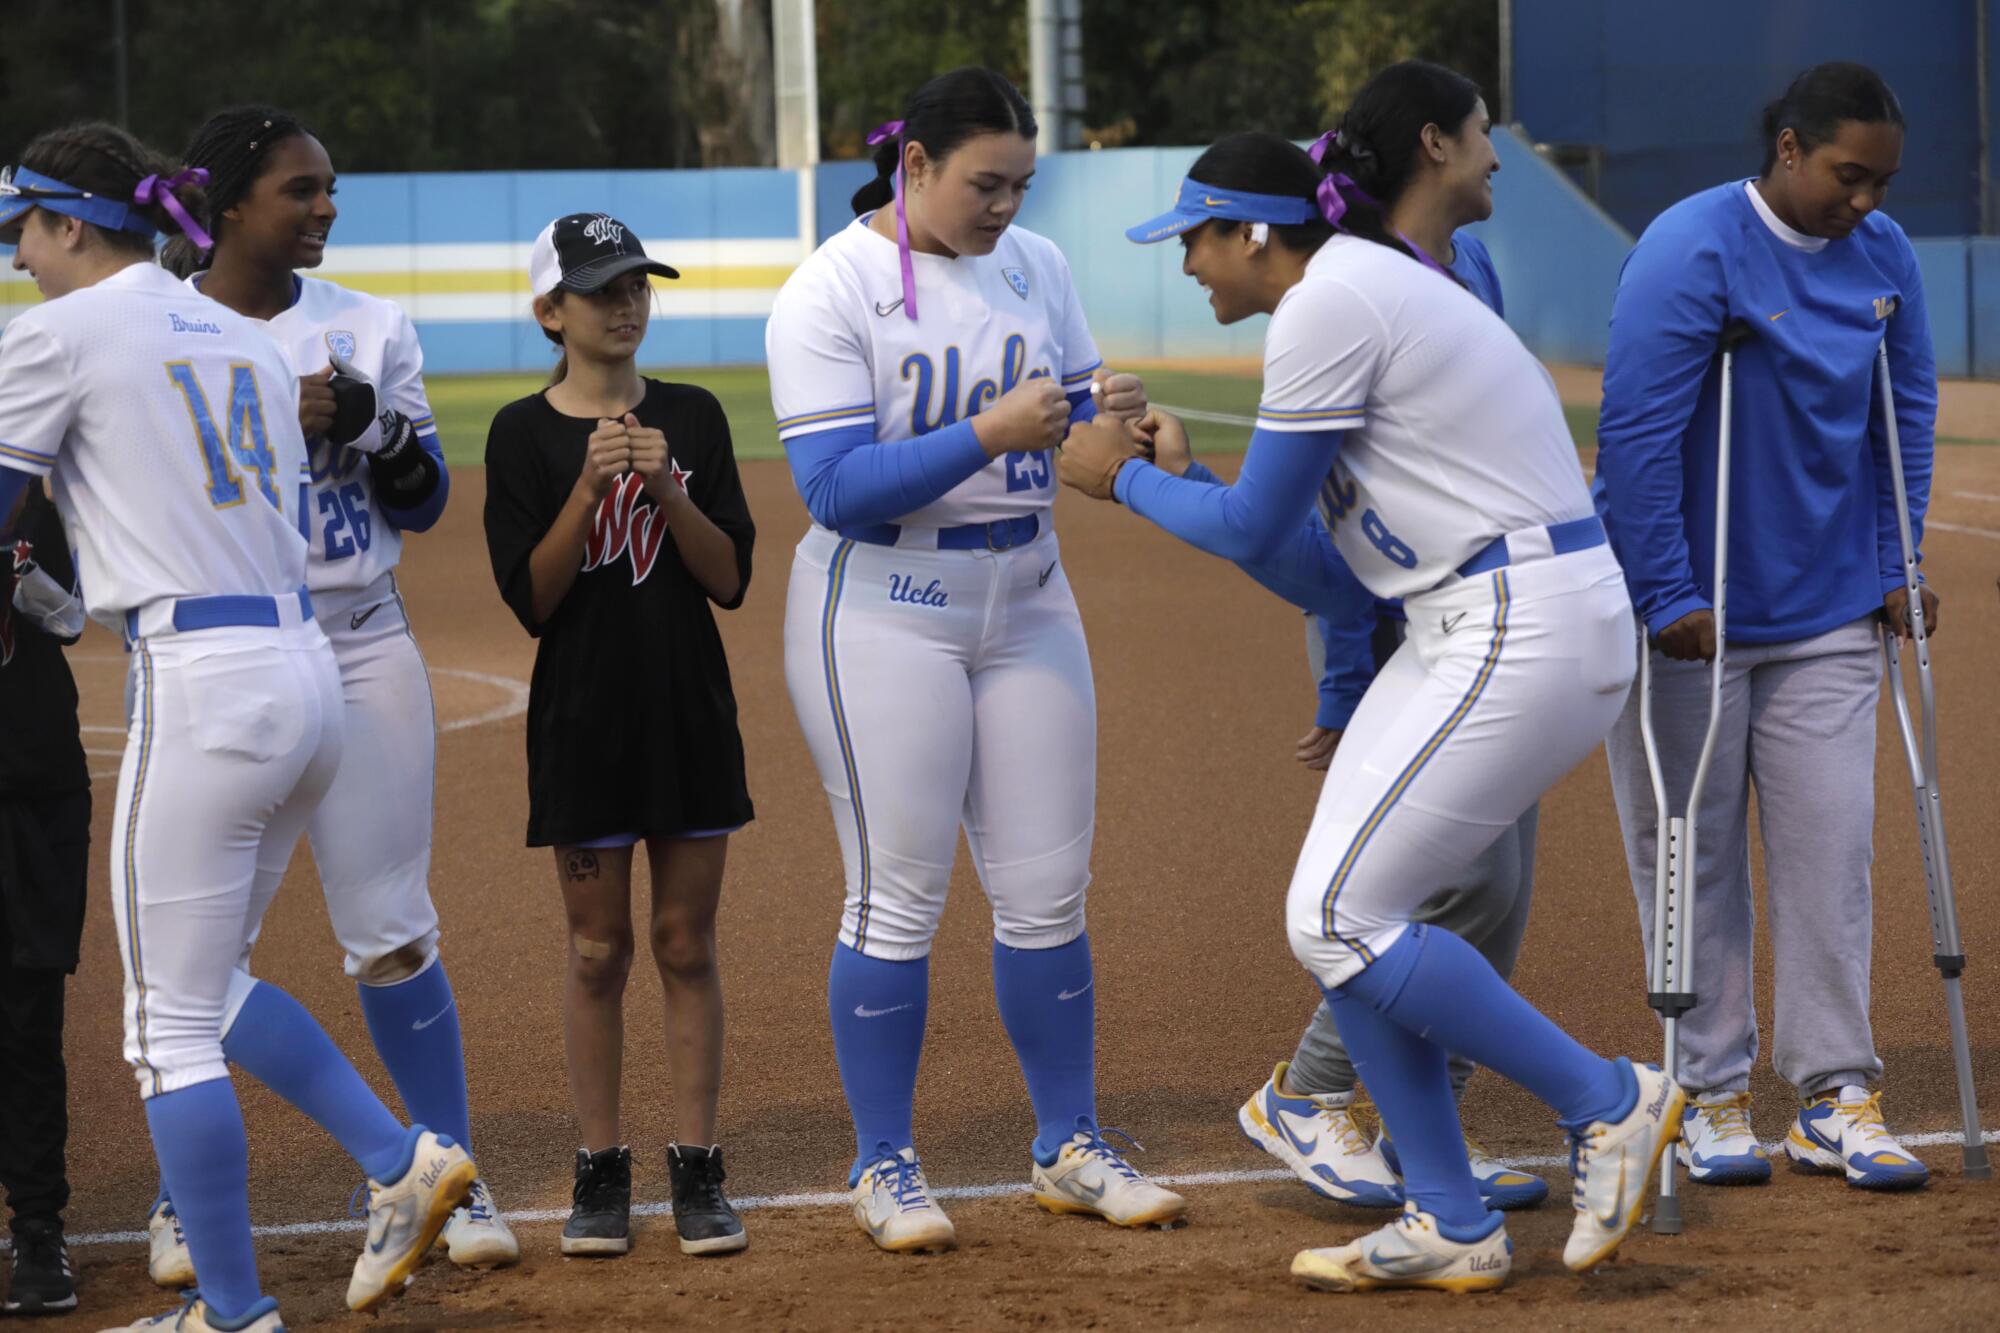 UCLA bullpen catcher Taylor Sullivan, center, is greeted by pitcher Megan Faraimo while the team is introduced to the crowd.